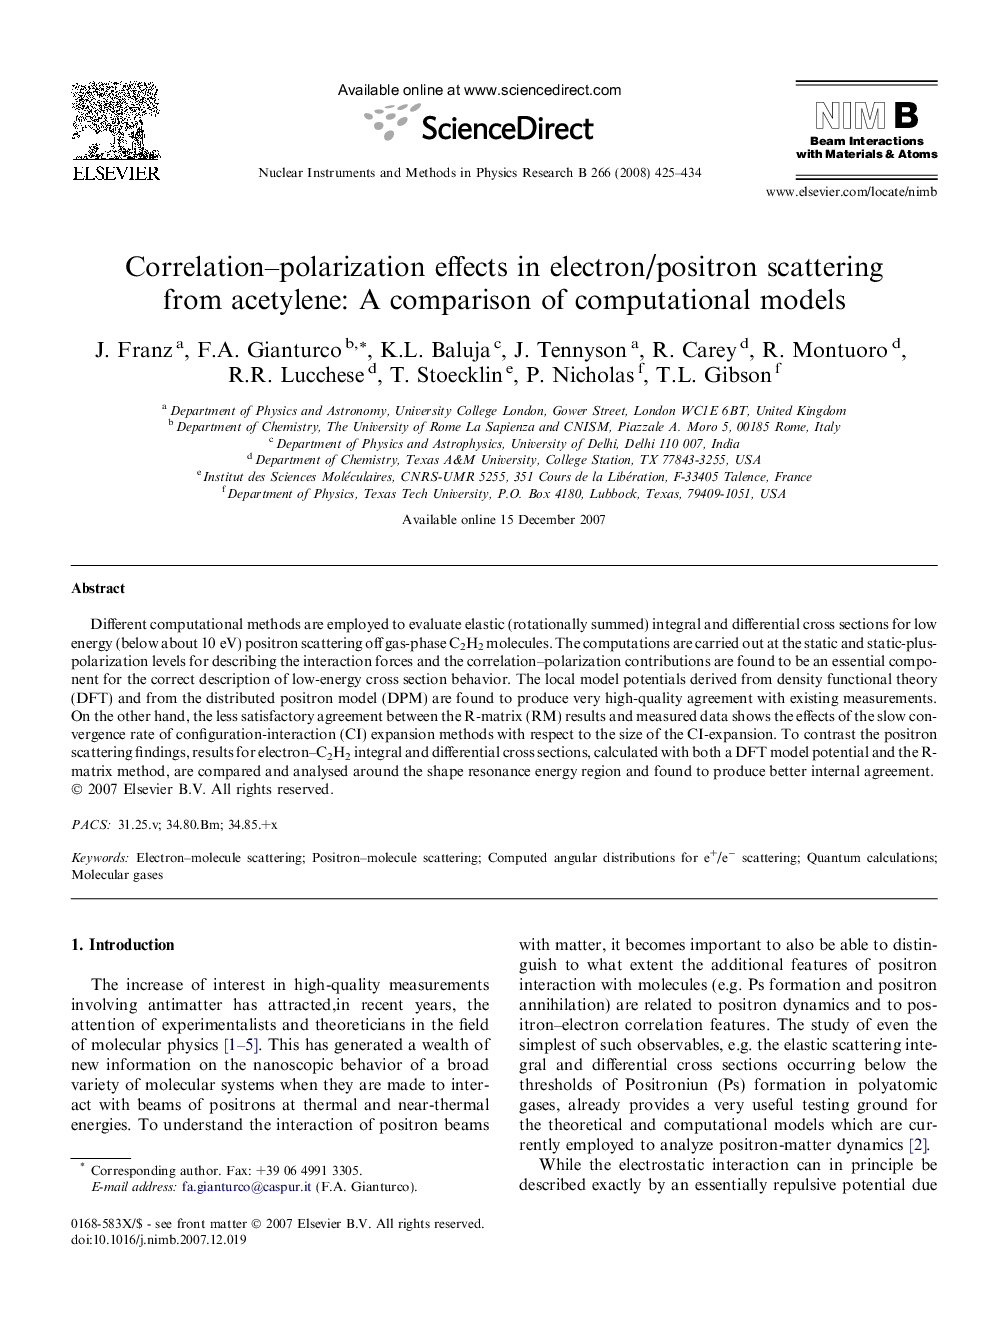 Correlation–polarization effects in electron/positron scattering from acetylene: A comparison of computational models